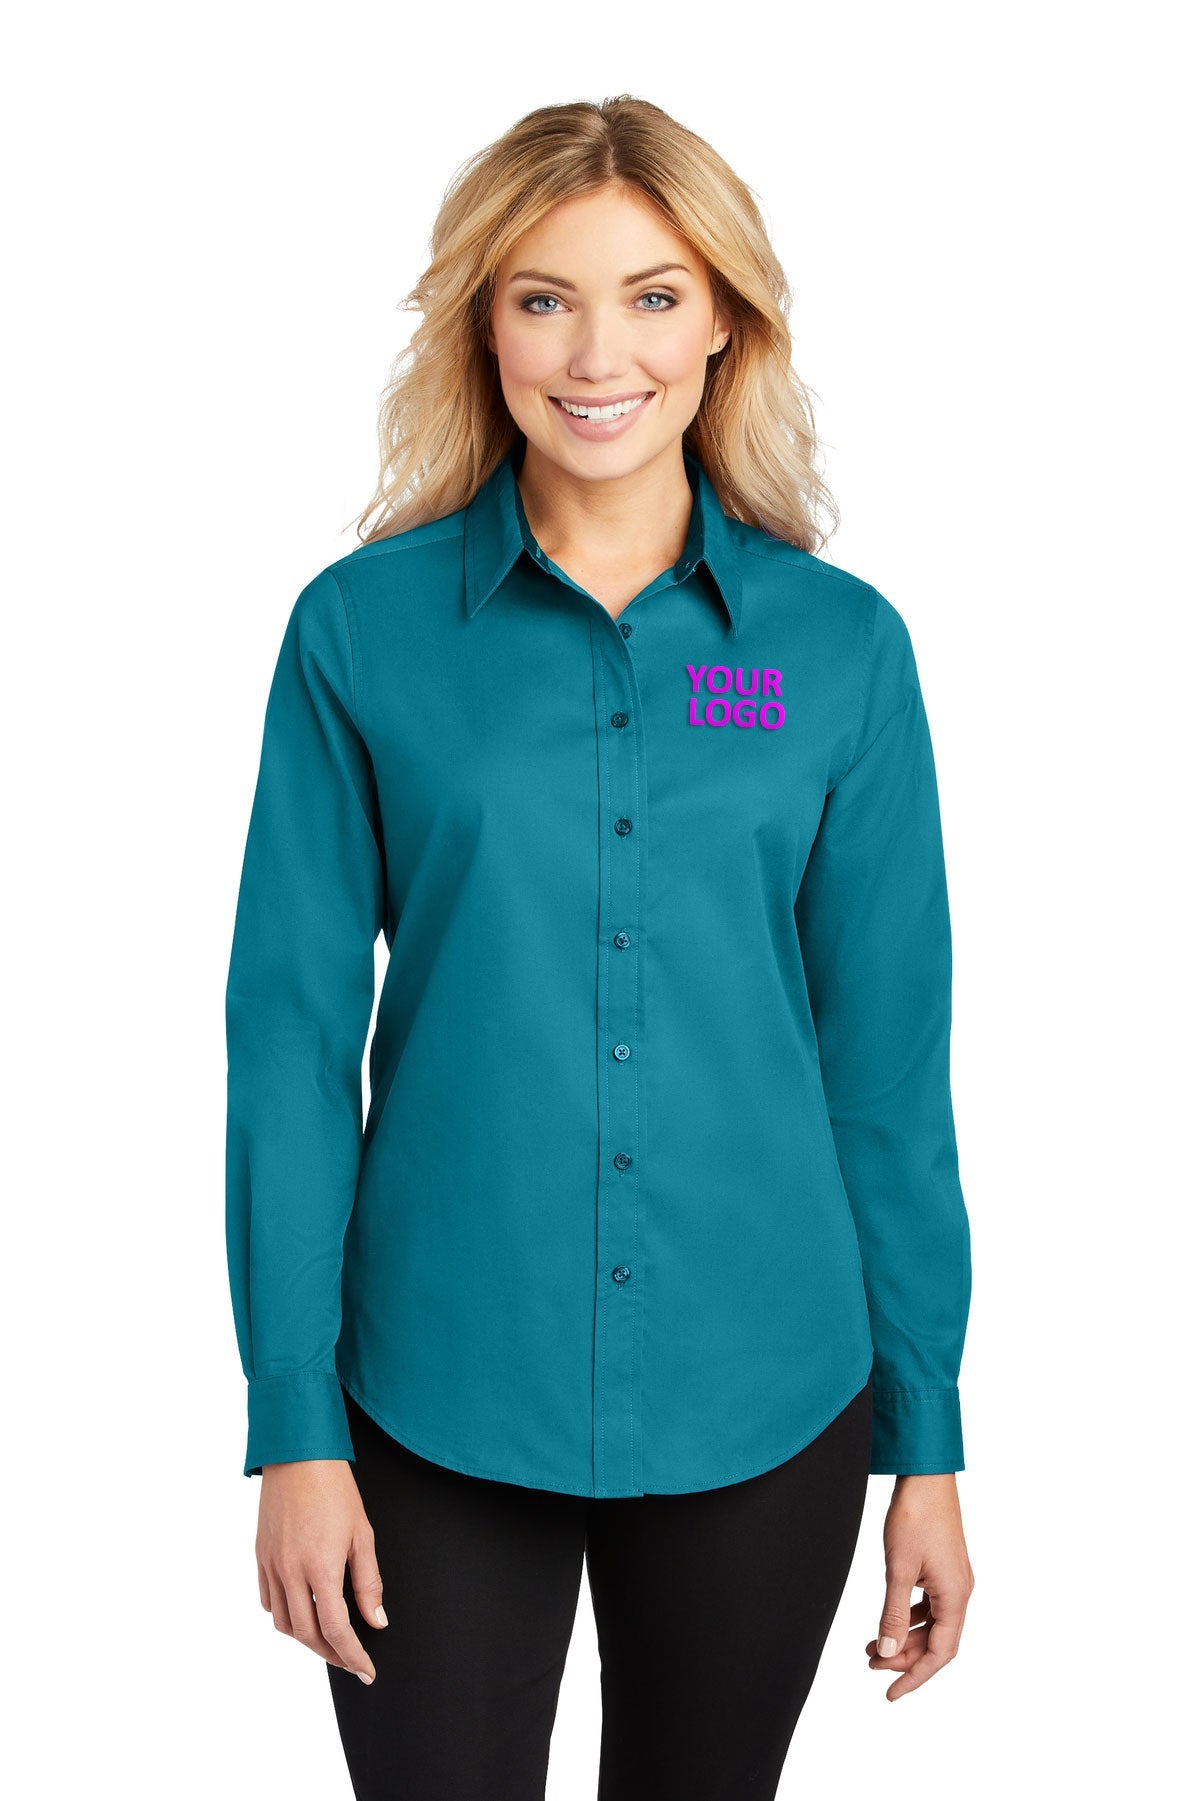 Port Authority Teal Green L608 custom embroidered shirts